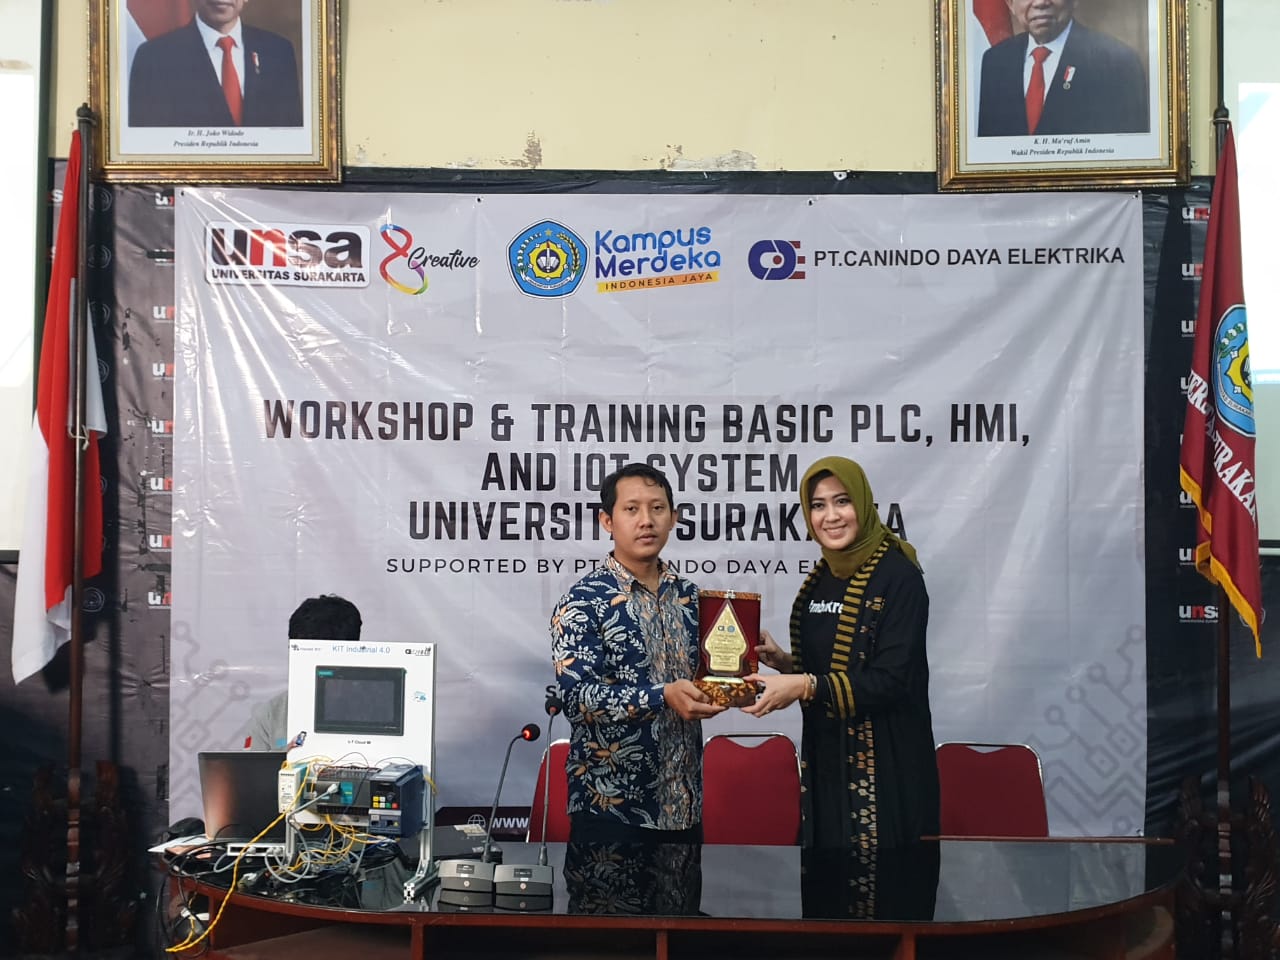 You are currently viewing WORKSHOP & TRAINING BASIC PLC, HMI, & IOT SYSTEM